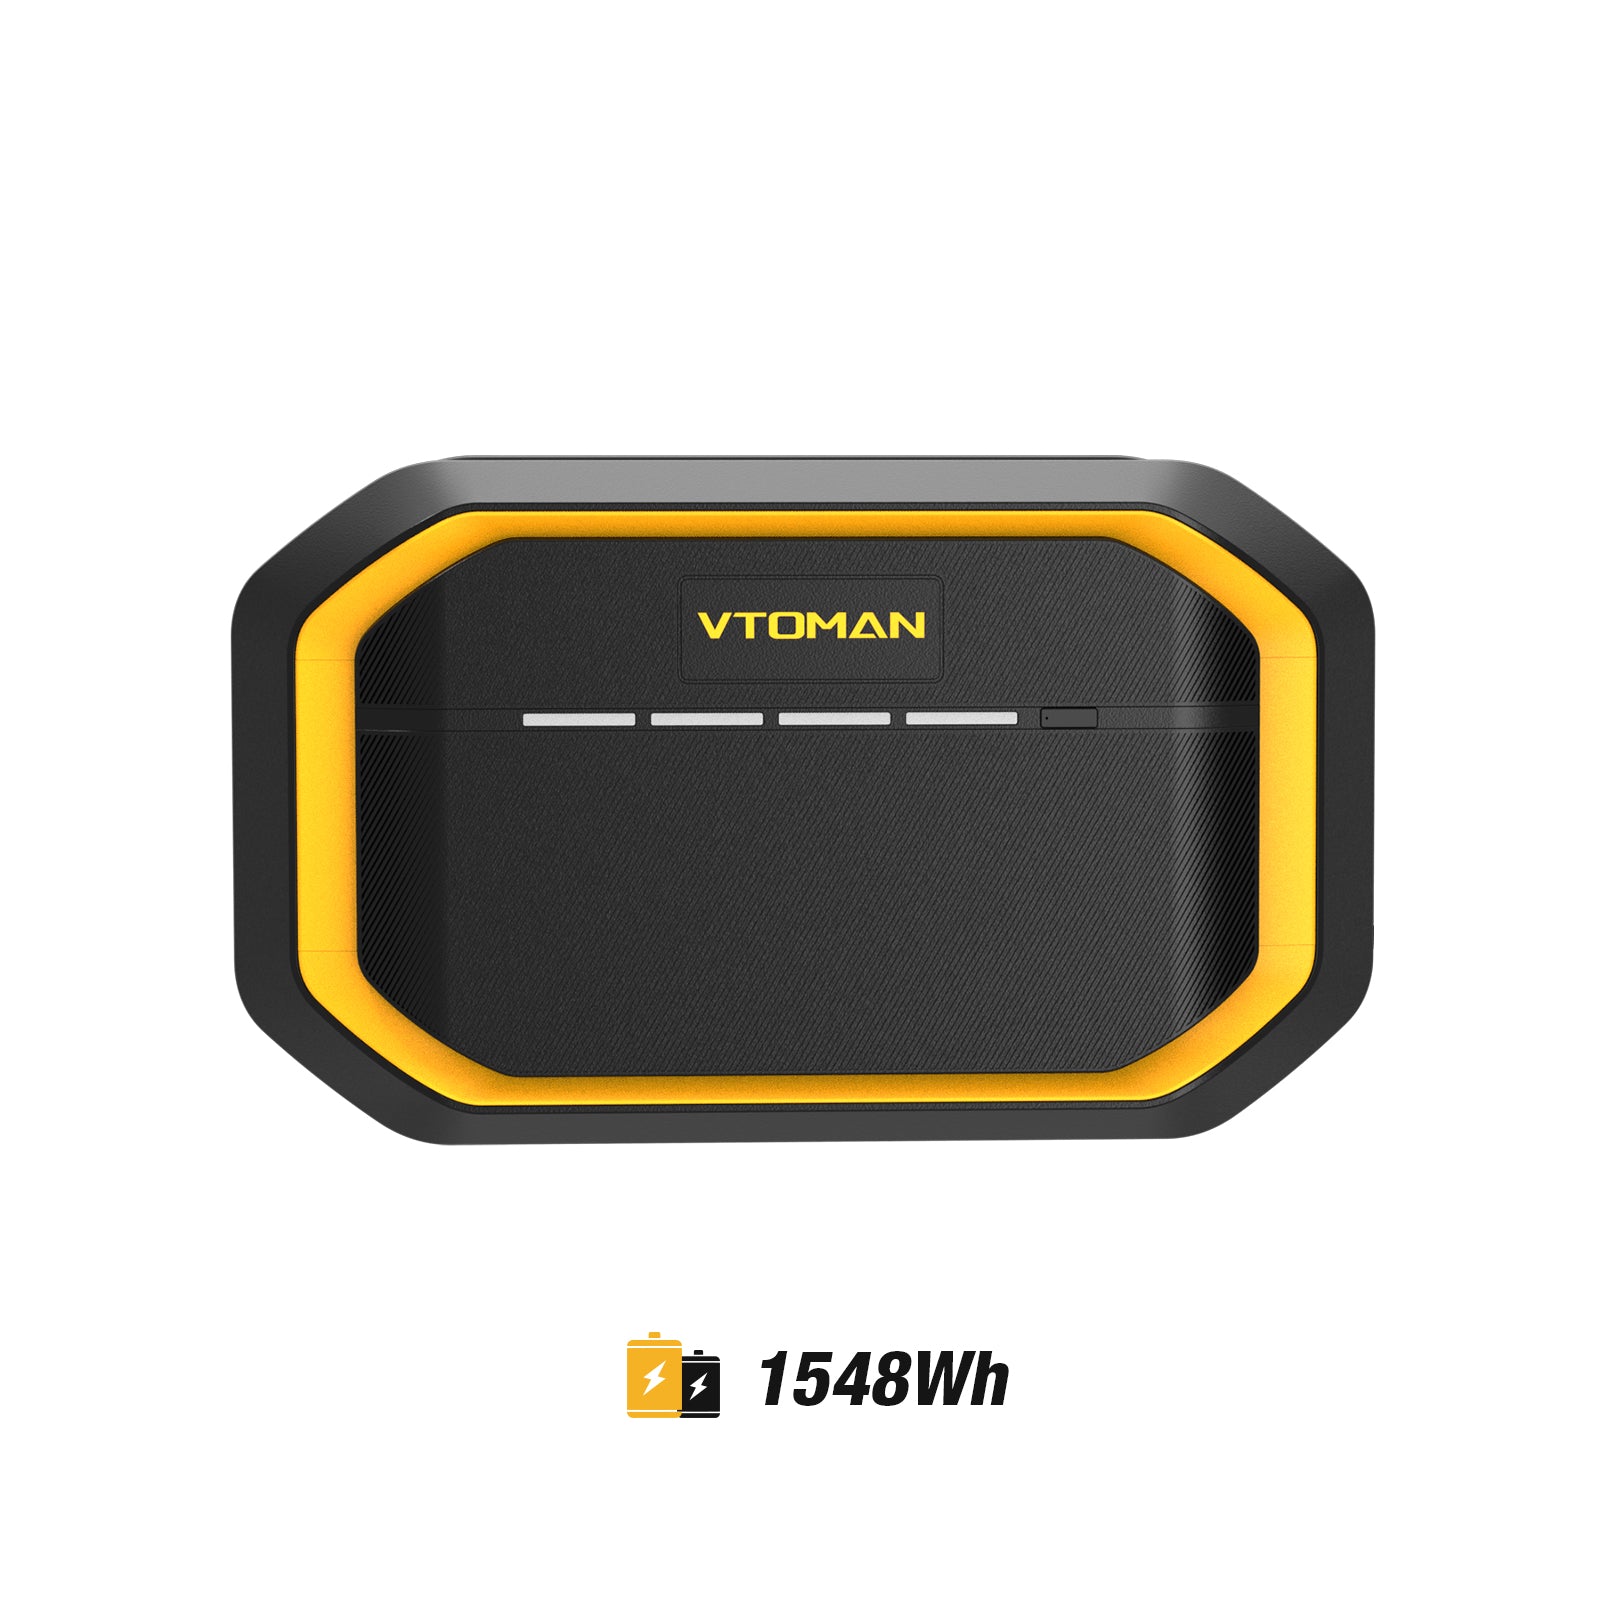 1548Wh extra battery of VTOMAN FlashSpeed Series Power Station